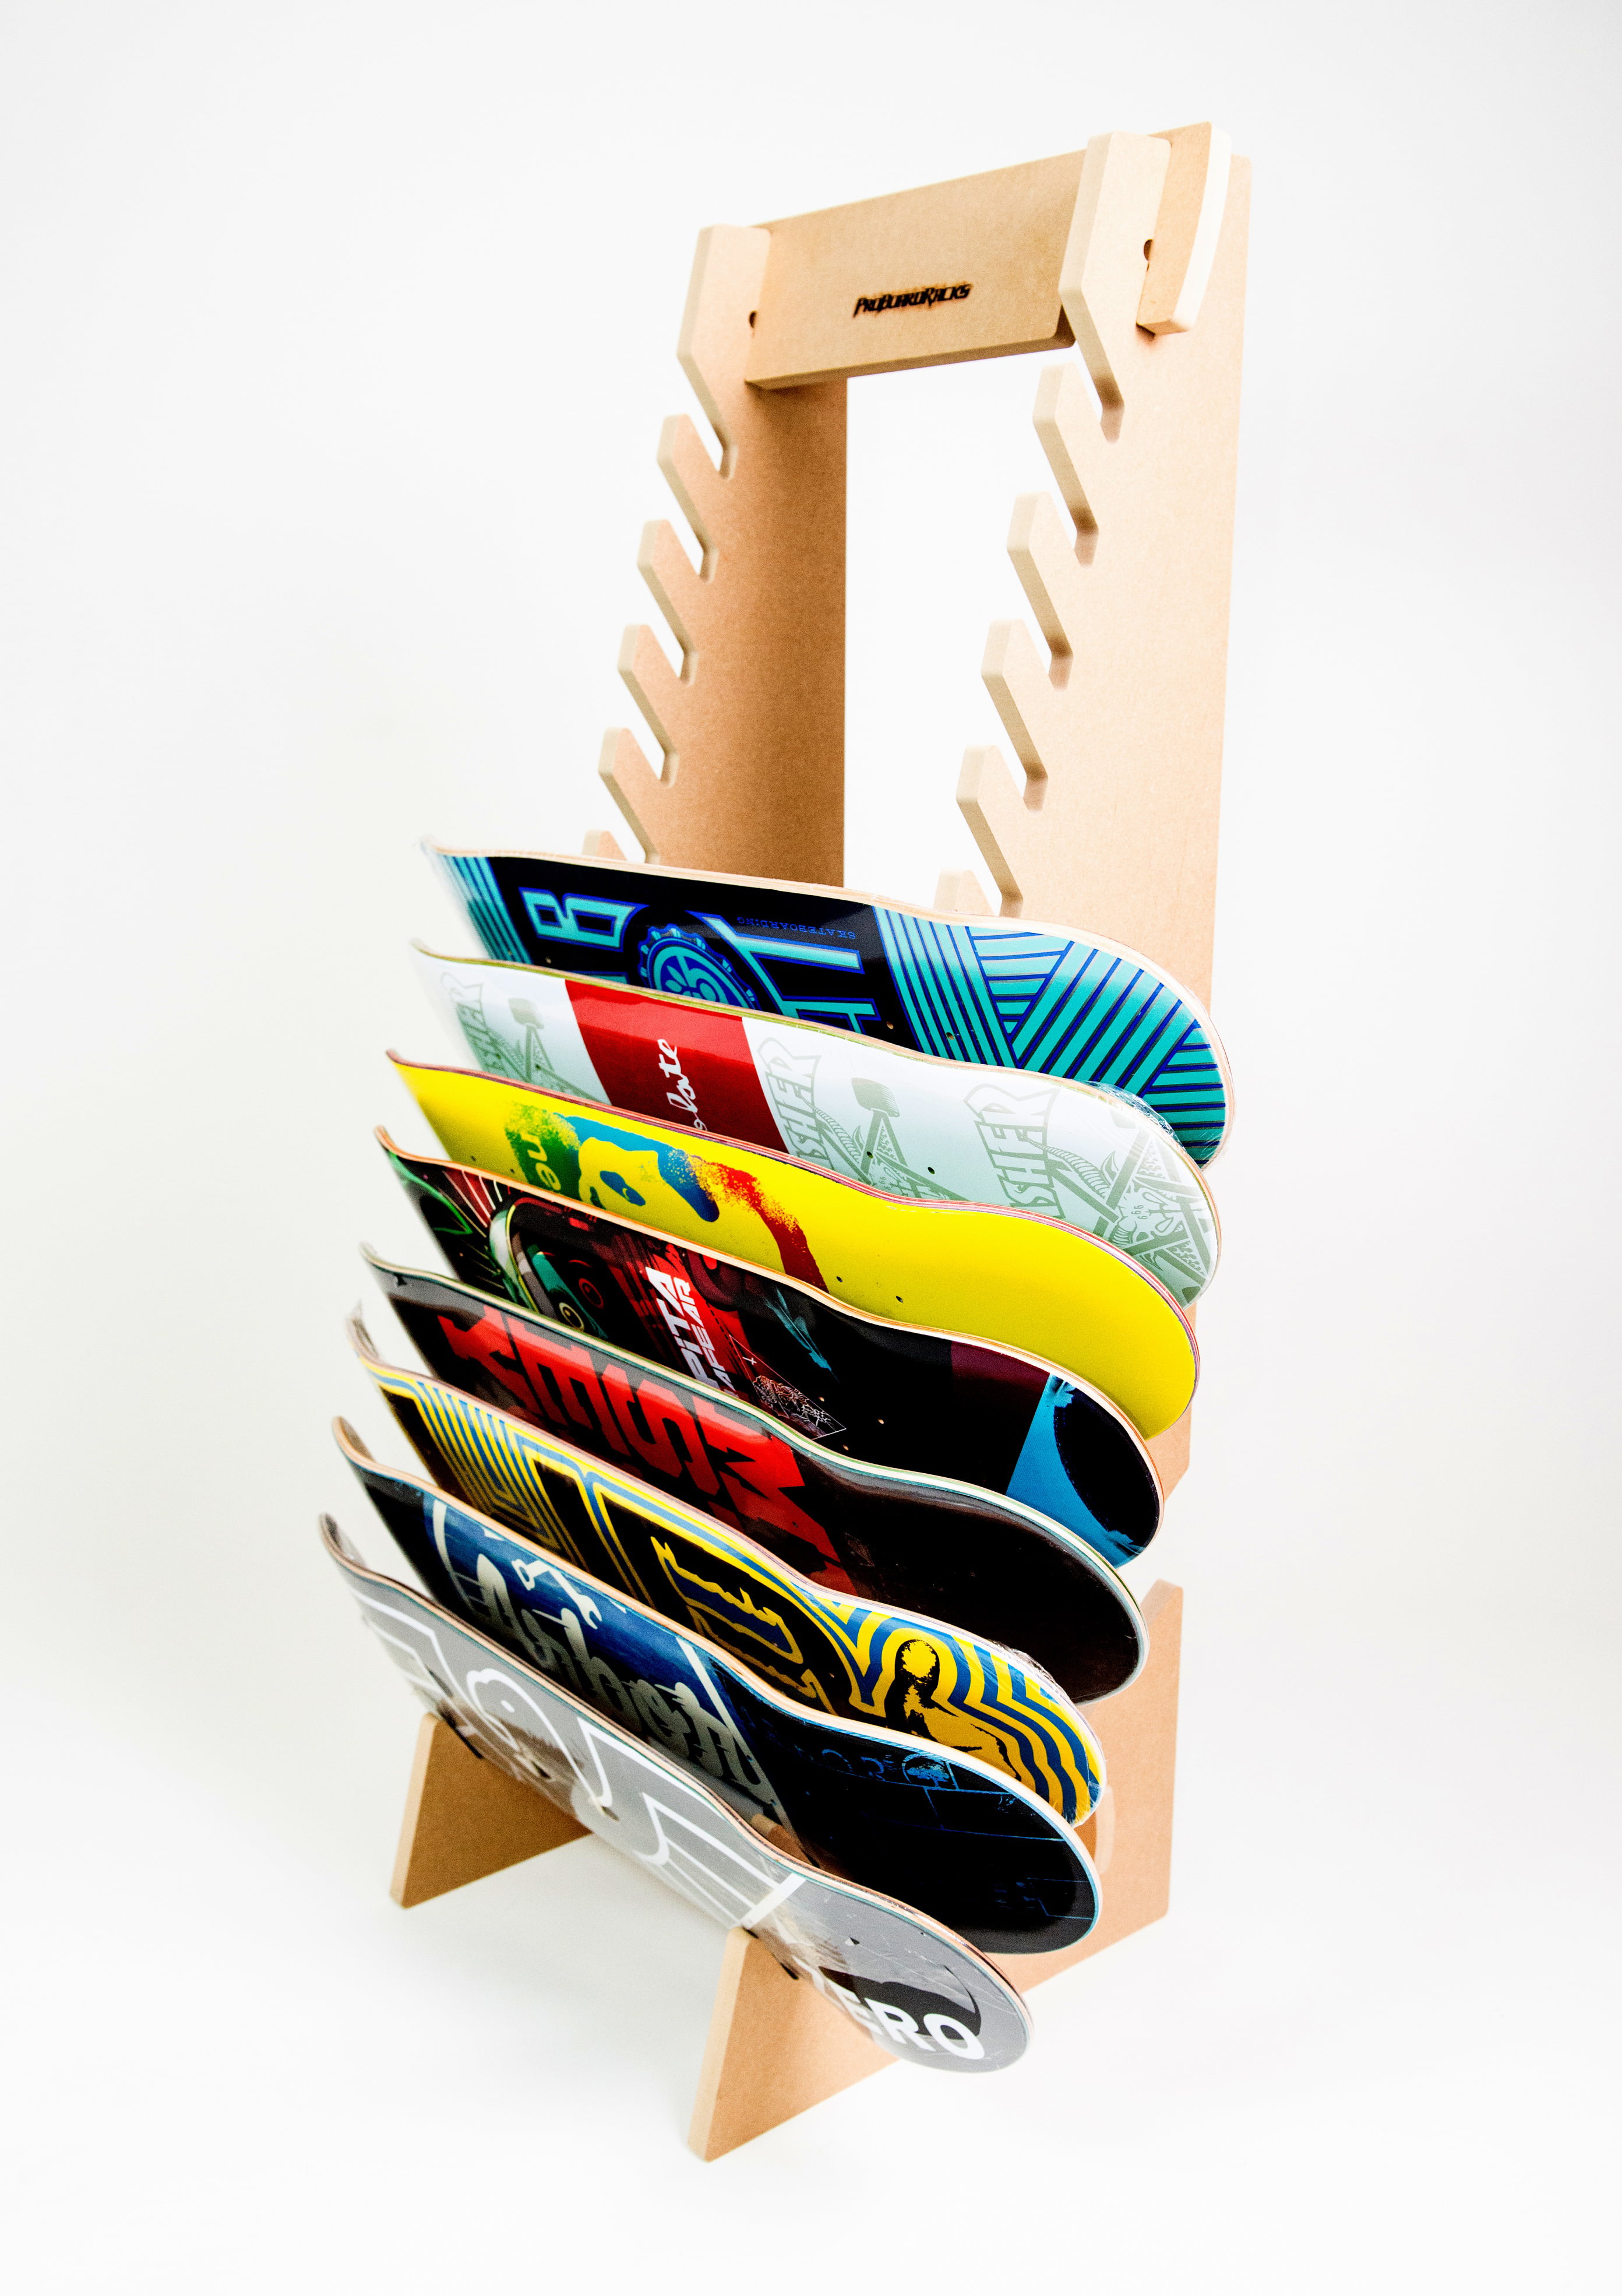 Storage for: Snowboards 6 Level and More Ripsticks Skateboards Skis Premium Freestanding Skateboard Rack Scooters 